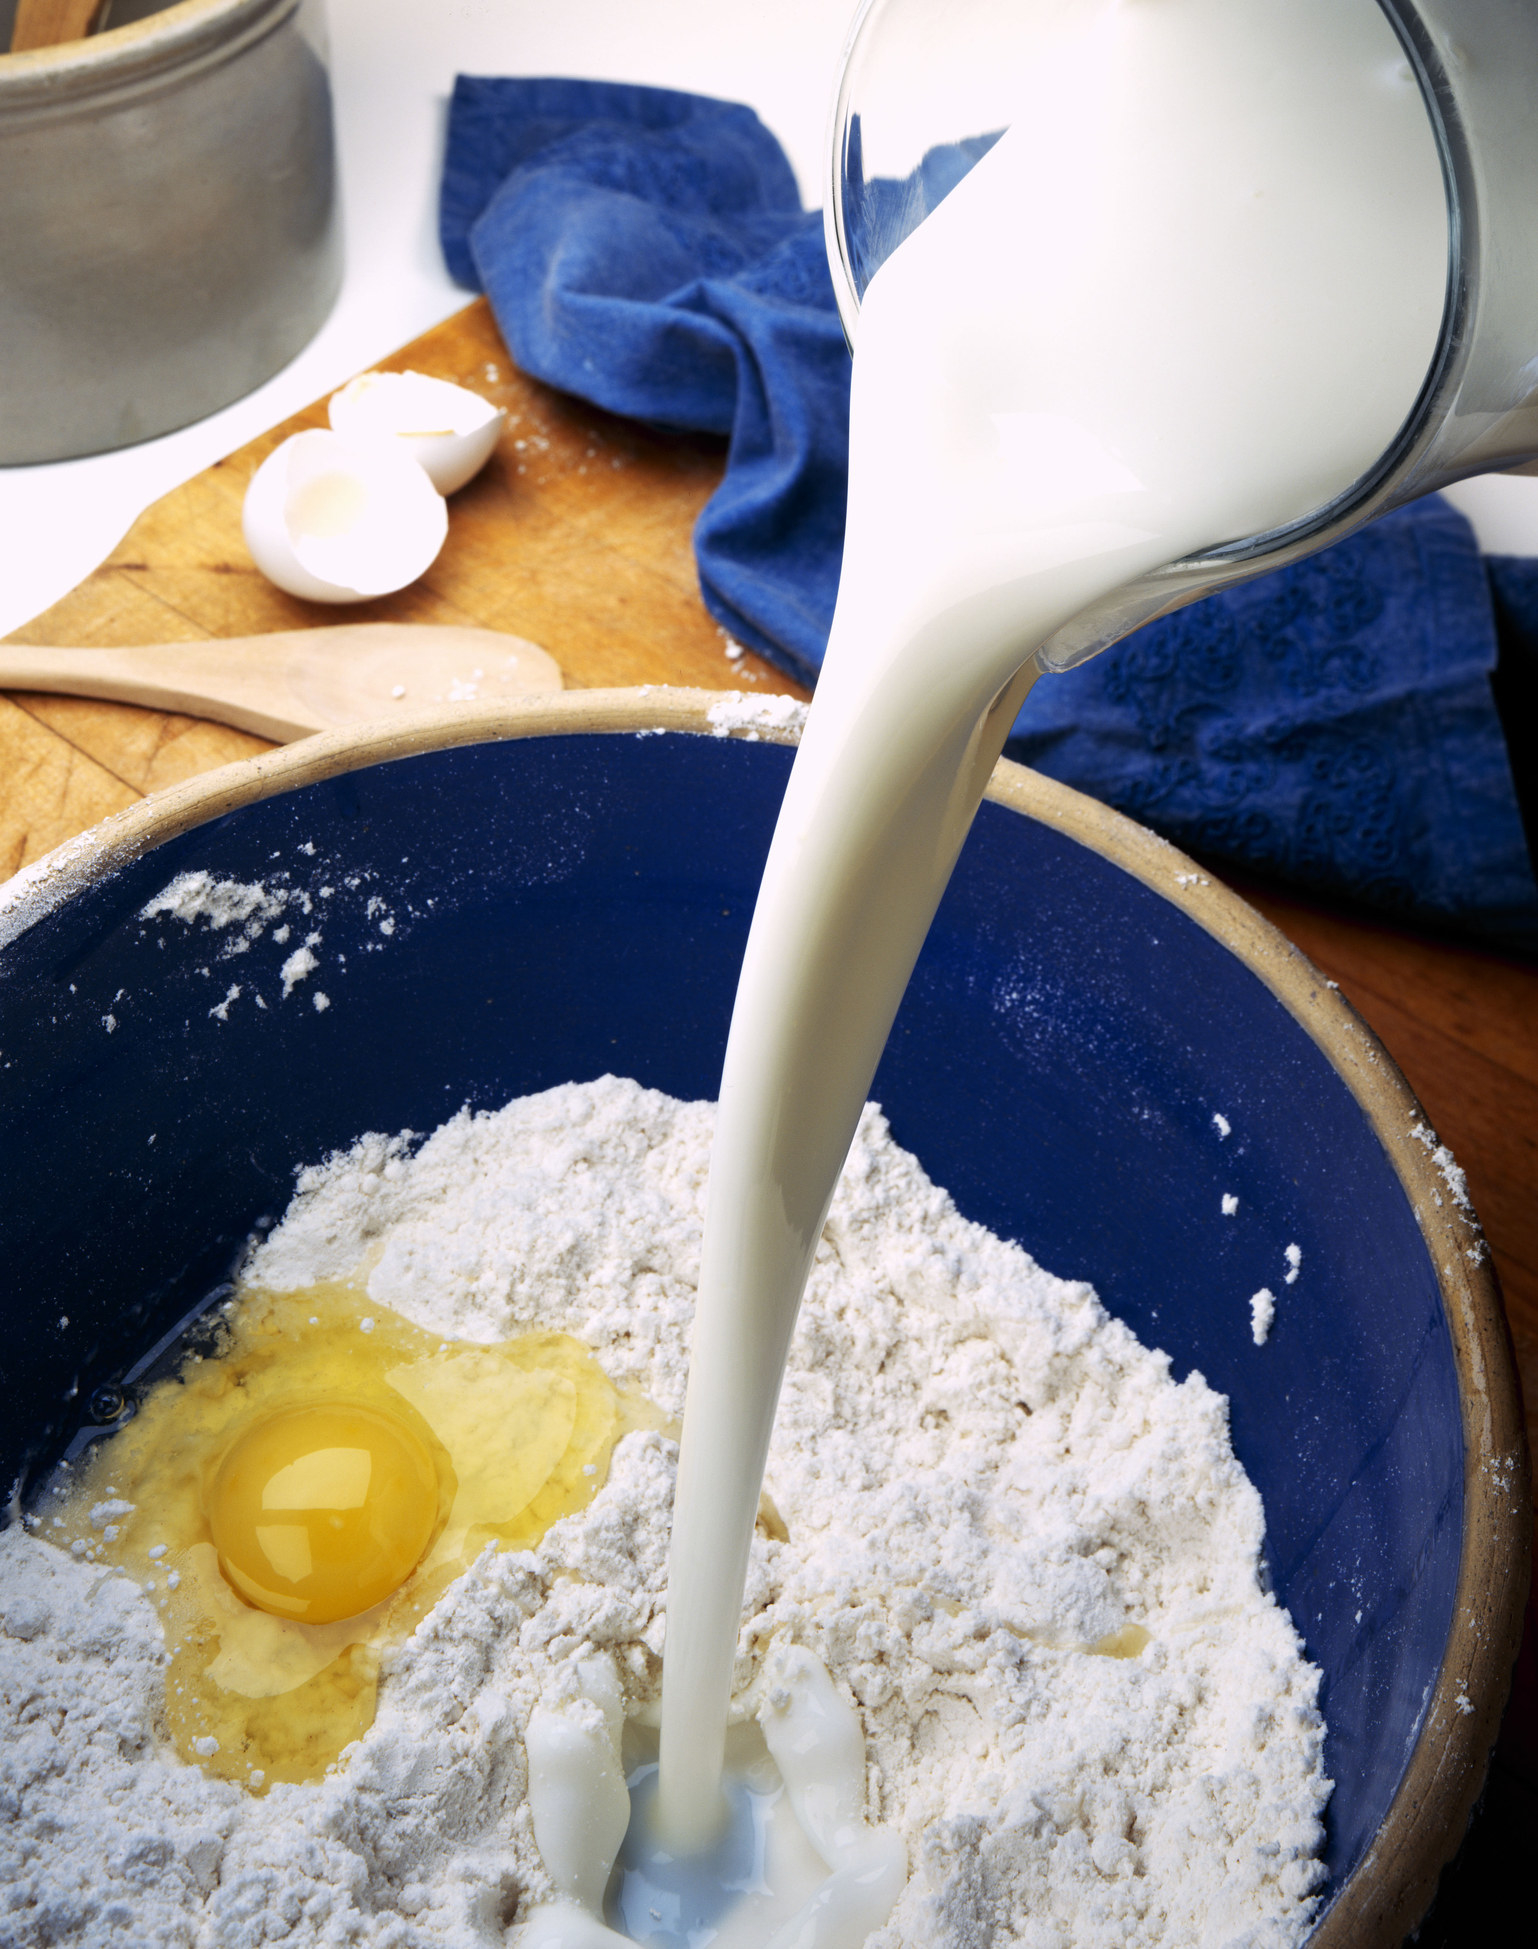 Pouring buttermilk into batter.